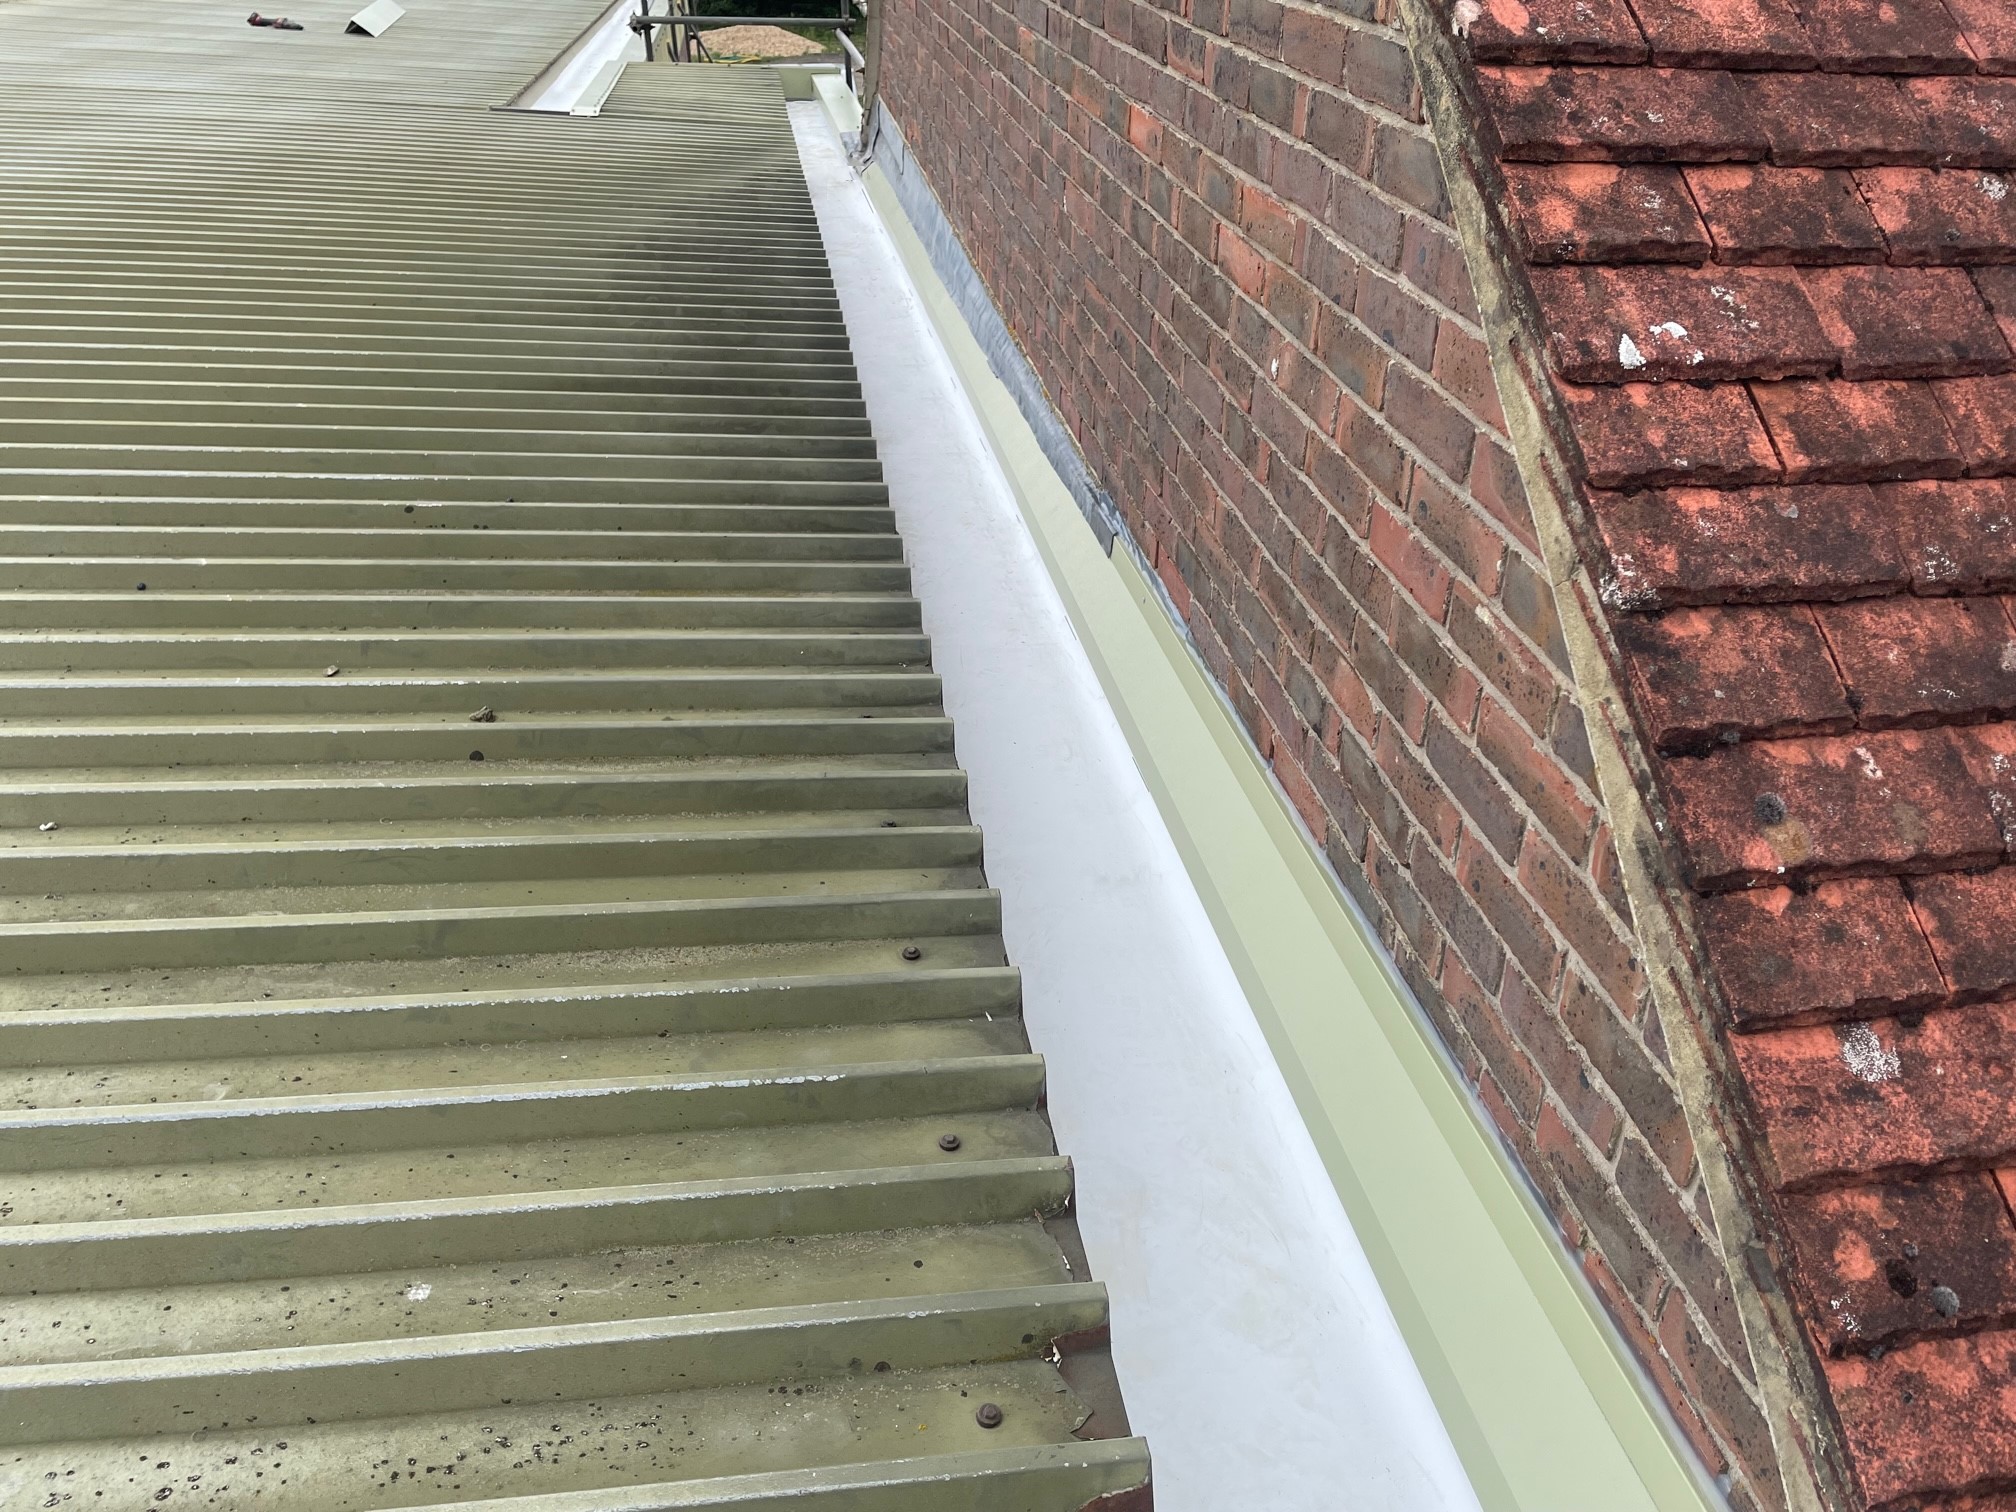 Gutter repairs at the Academy at a golf club in Slinfold, Horsham, West Sussex